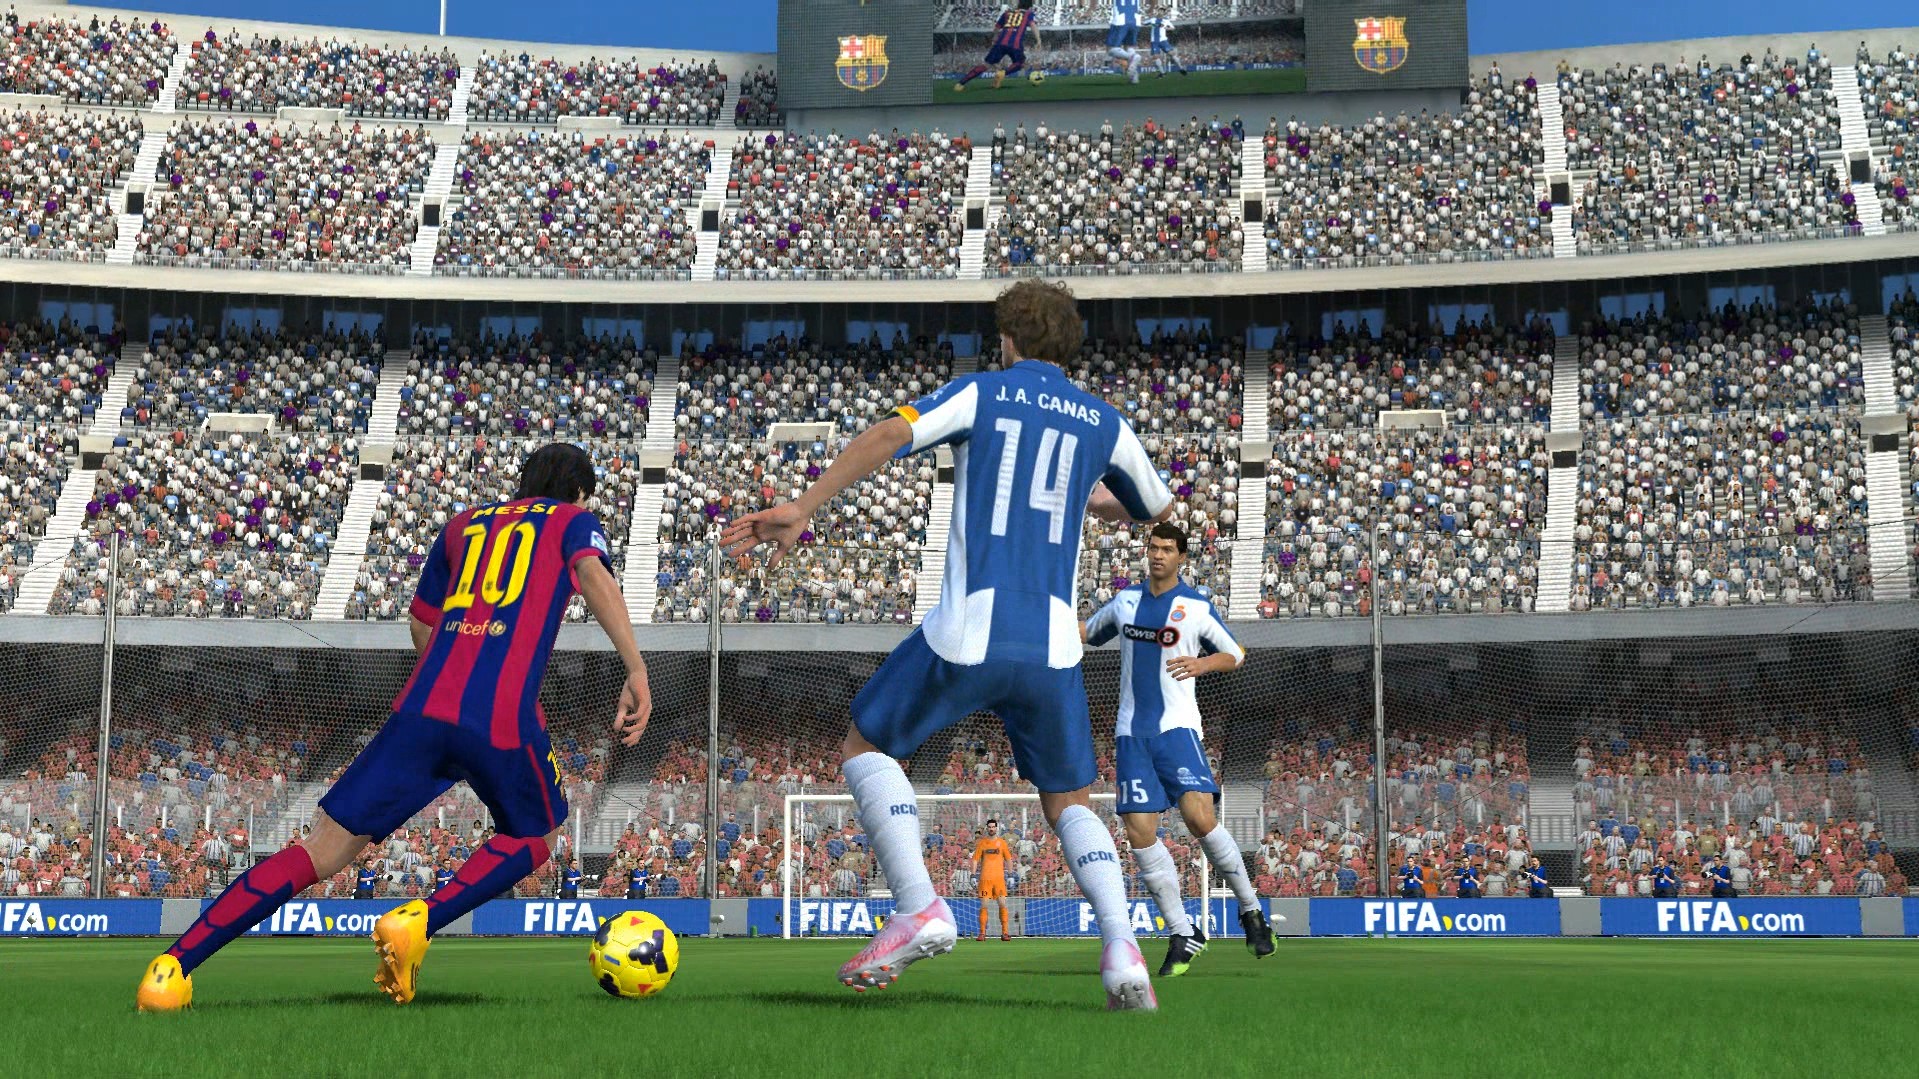 https://s3.cloud.cmctelecom.vn/2game-vn/pictures/images/2015/8/4/messi_fo3_3.jpg